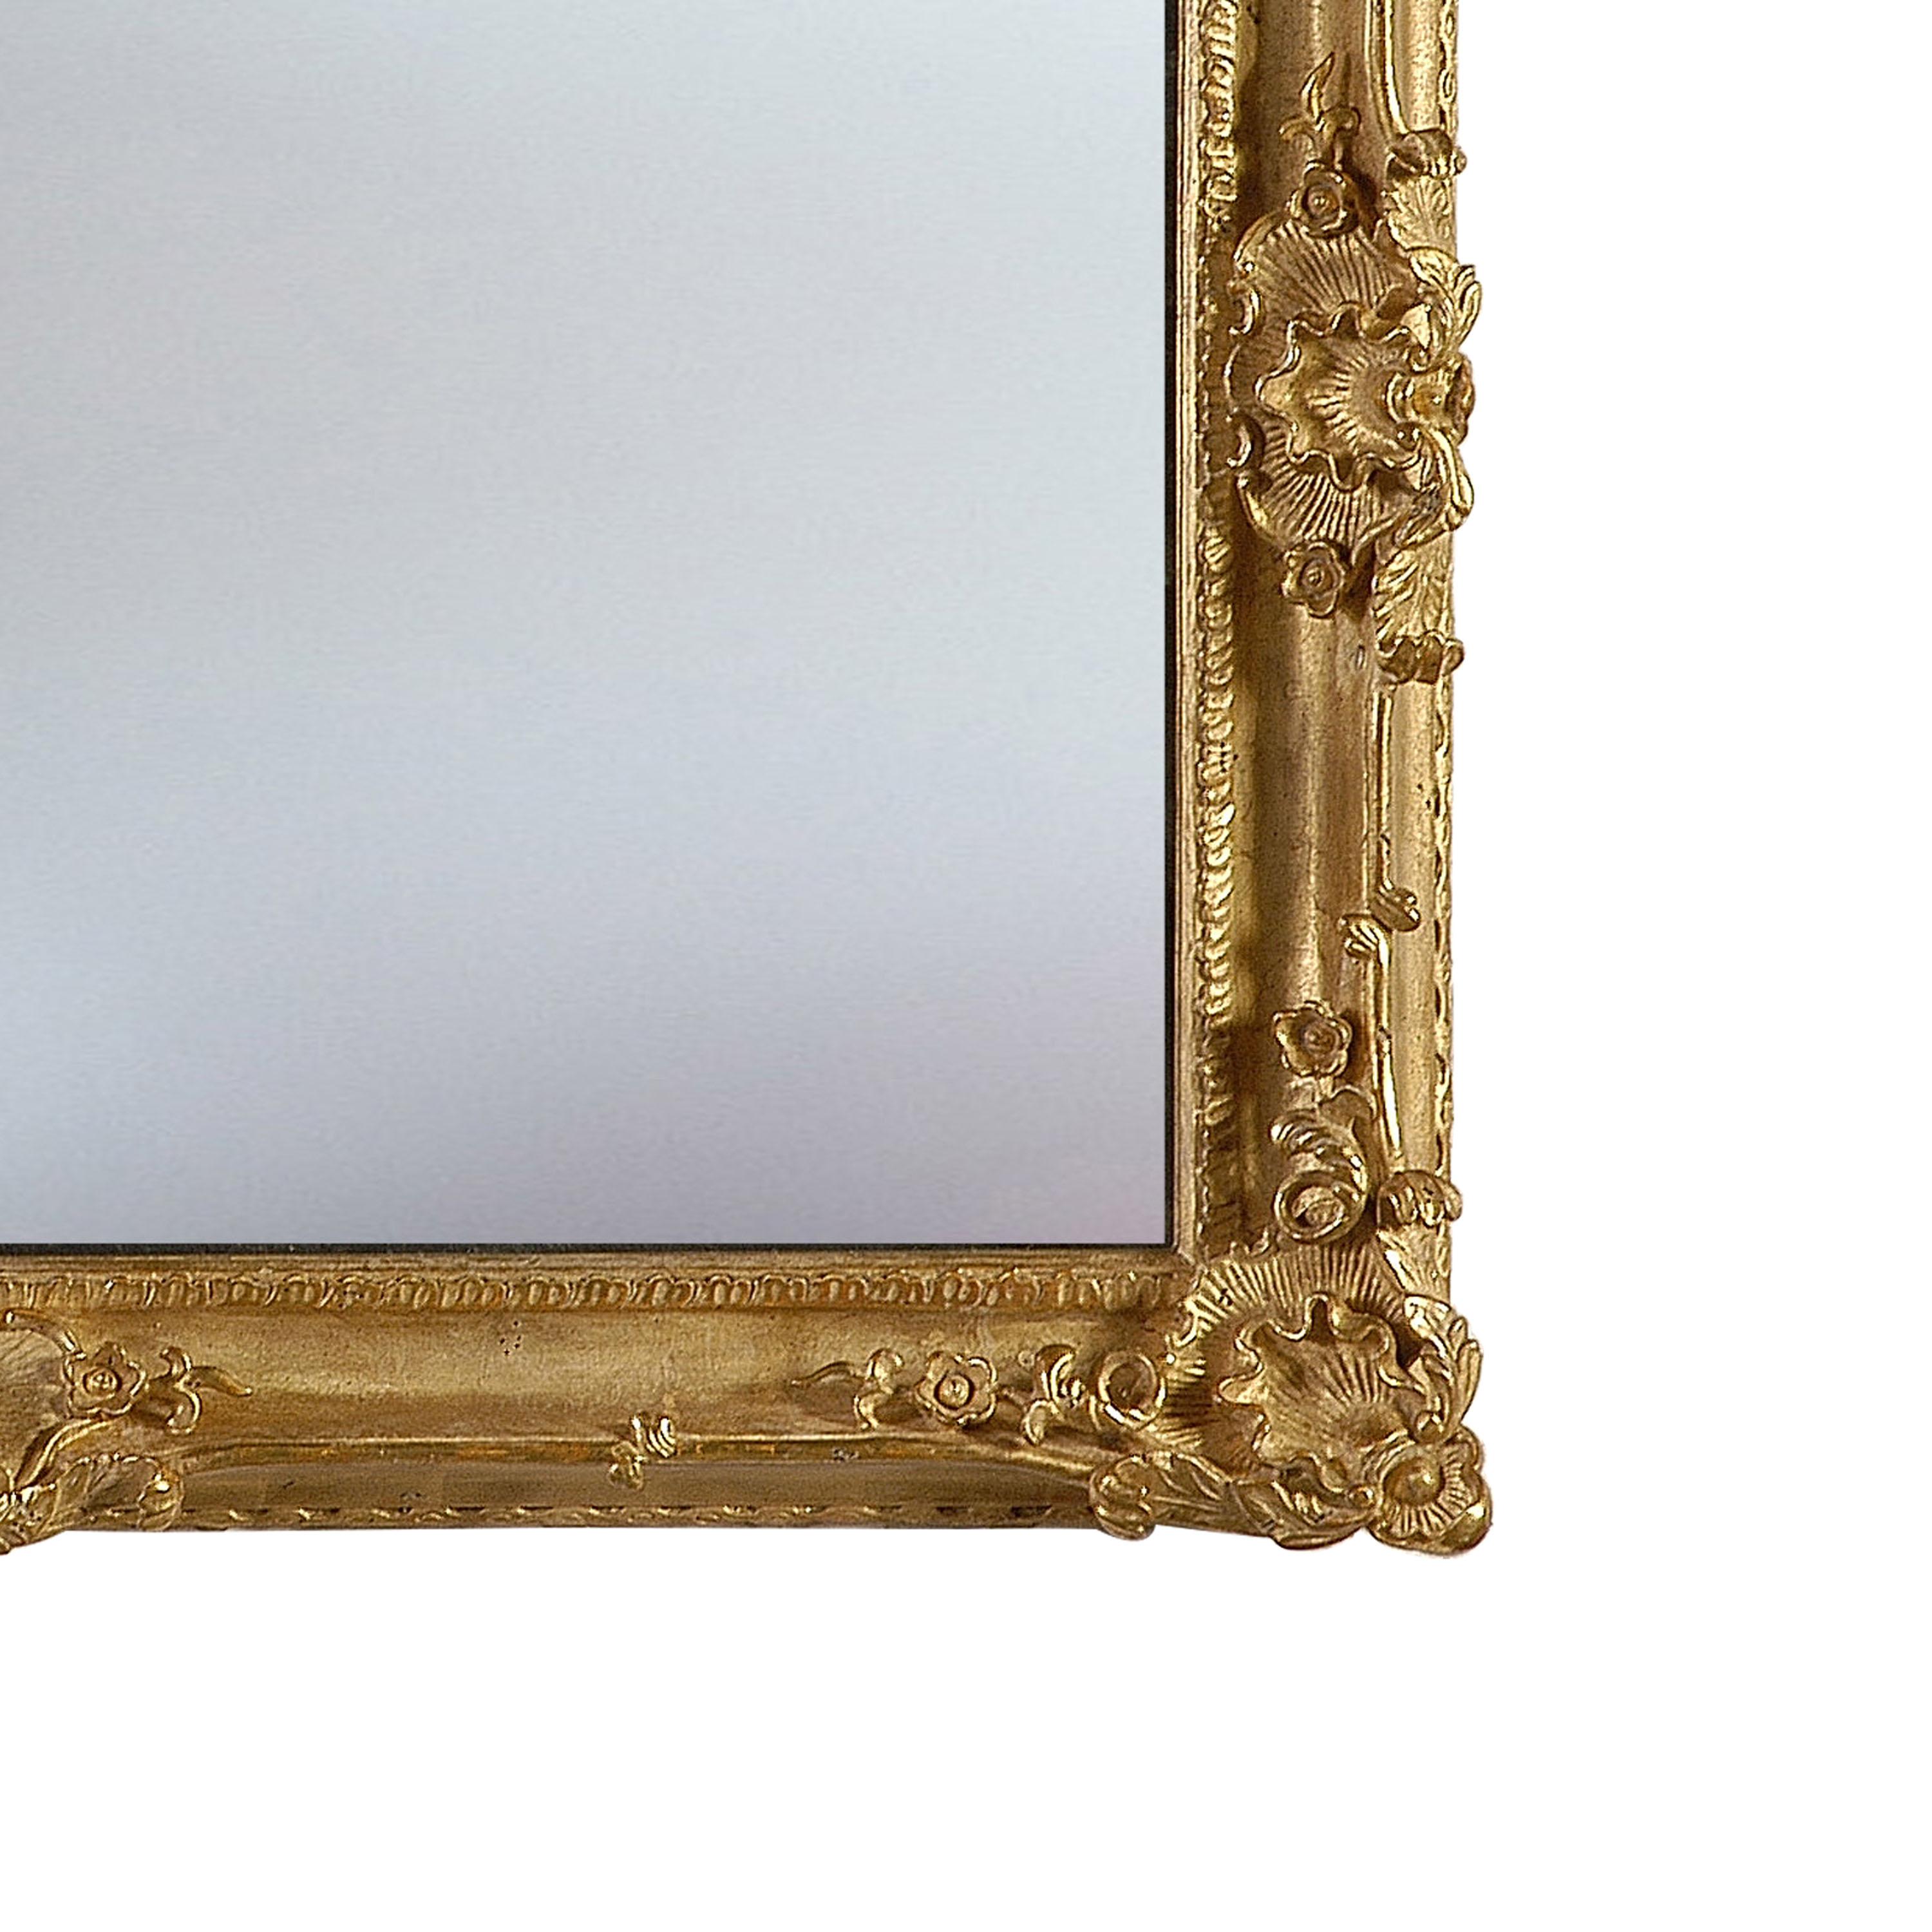 Neoclassical Regency style handcrafted mirror. Rectangular hand carved wooden structure with gold foiled finish, Spain, 1970.